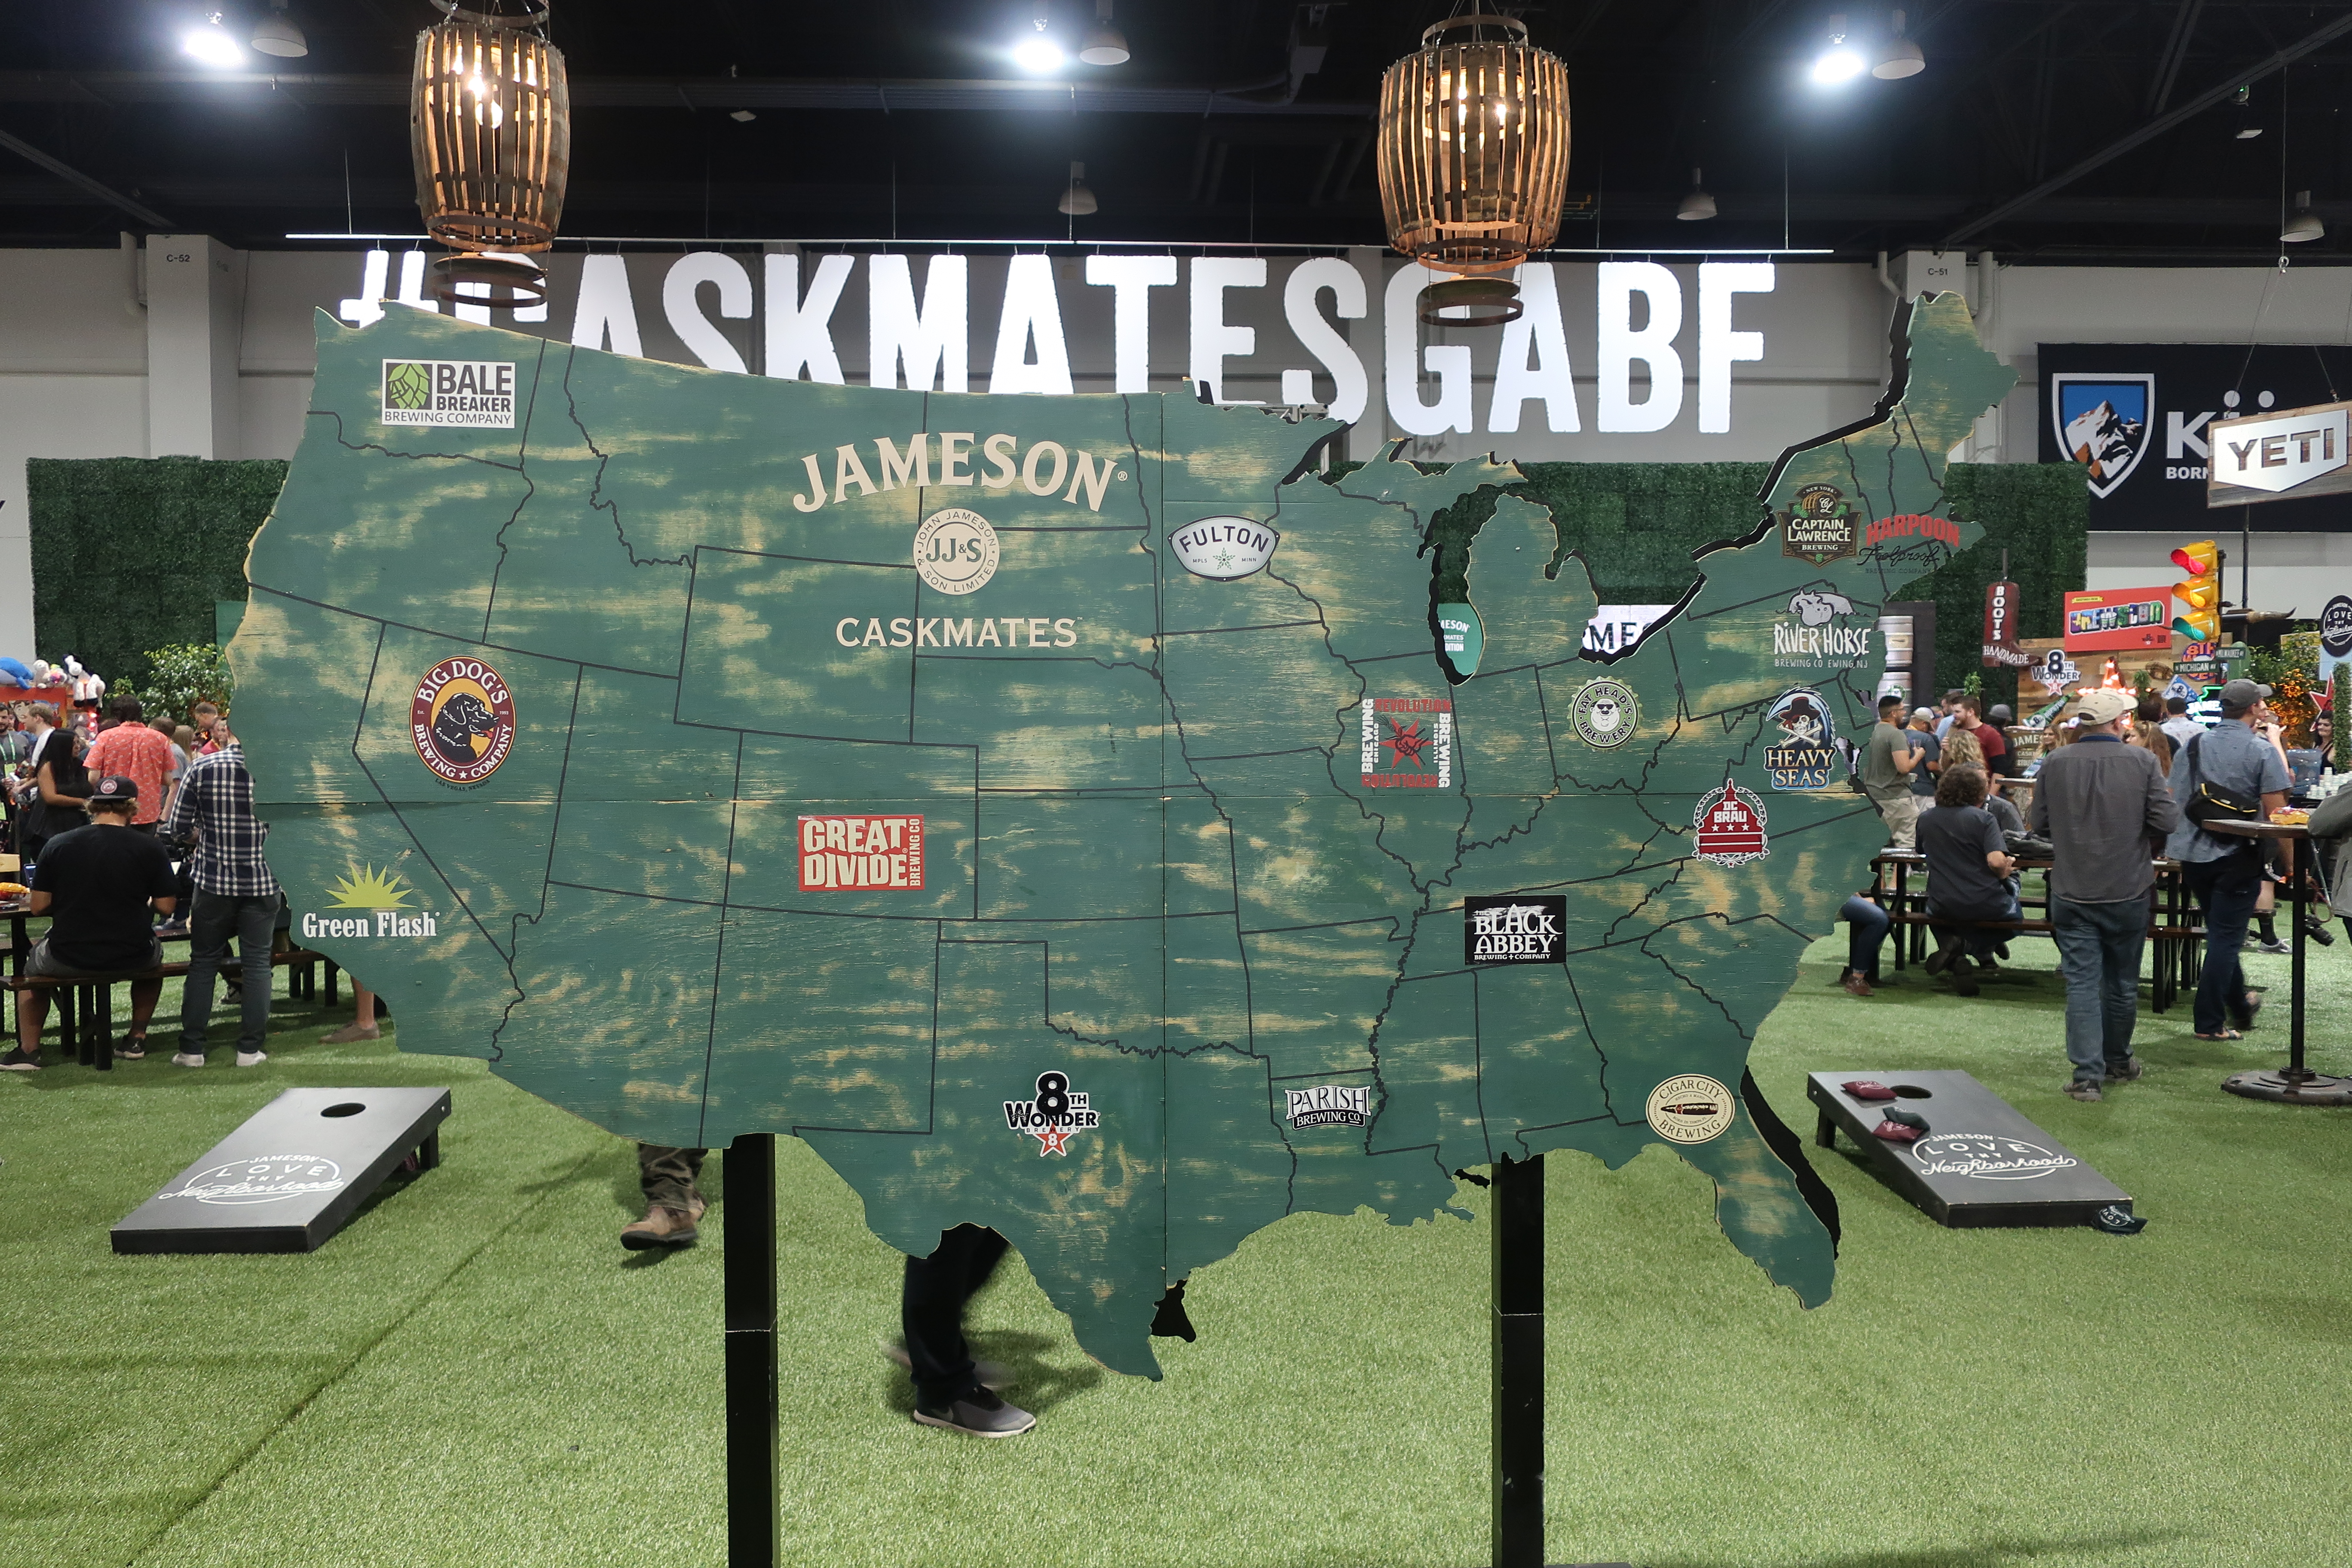 Jameson Caskmates at the 2018 Great American Beer Festival.